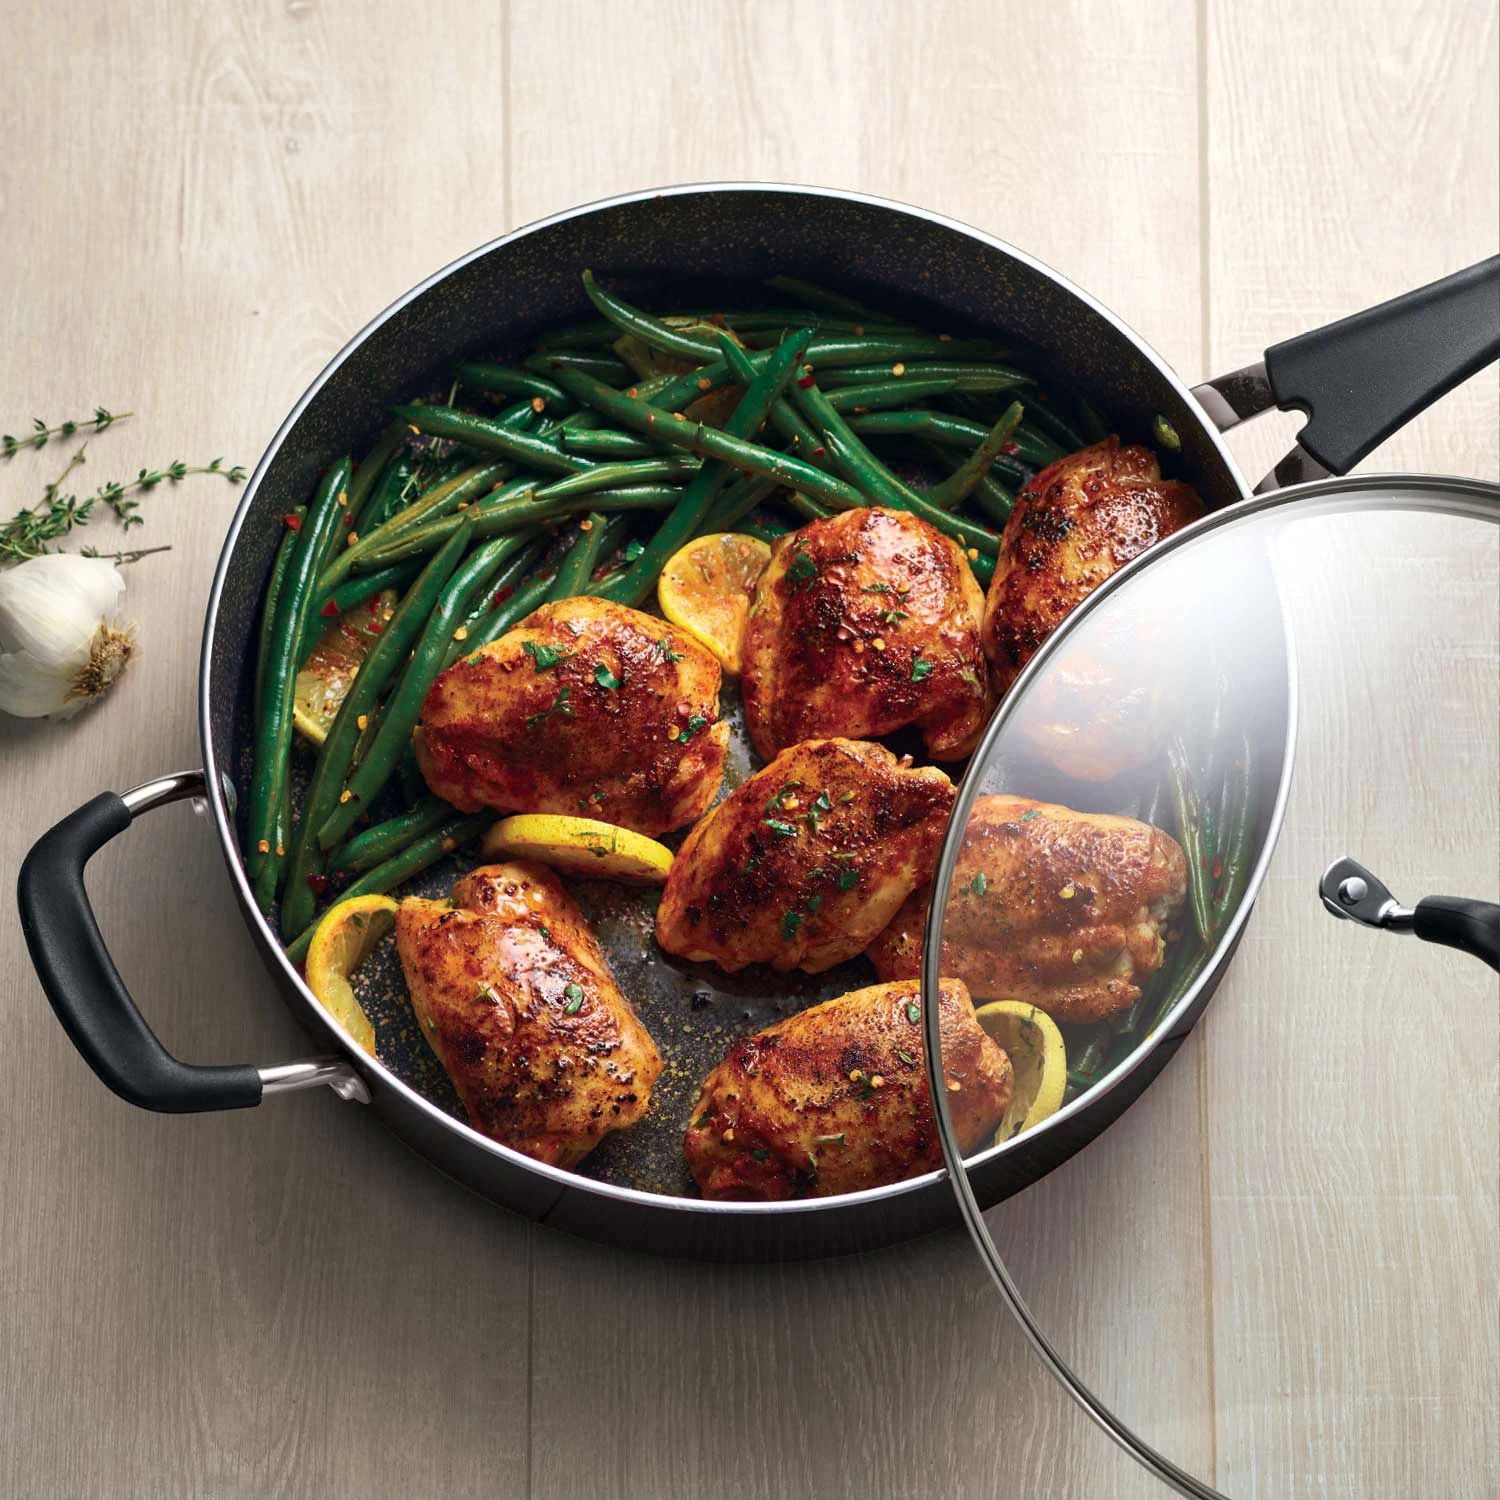 Tramontina 12.5 Covered Cast Iron Skillet